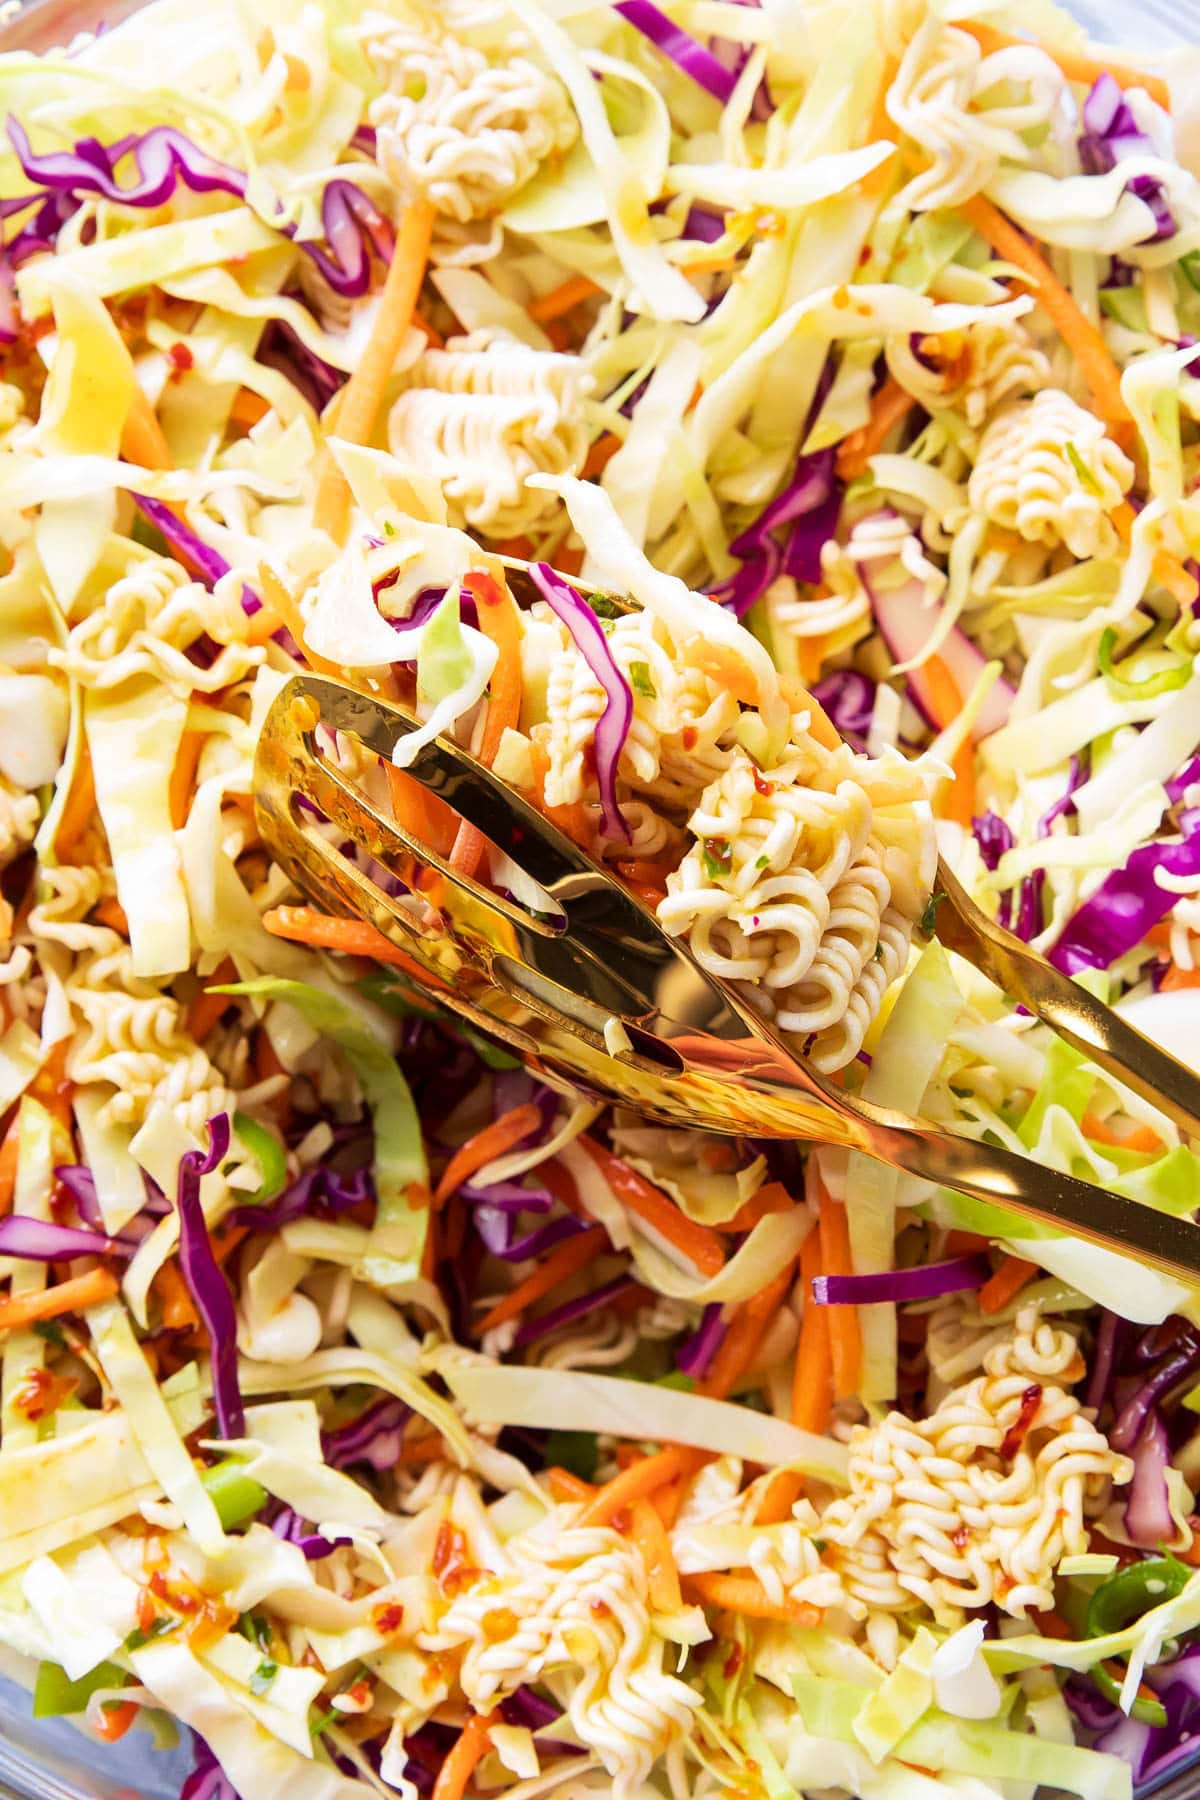 A pair of gold tongs holding up crunchy toppings and heaps of saucy asian vegetables